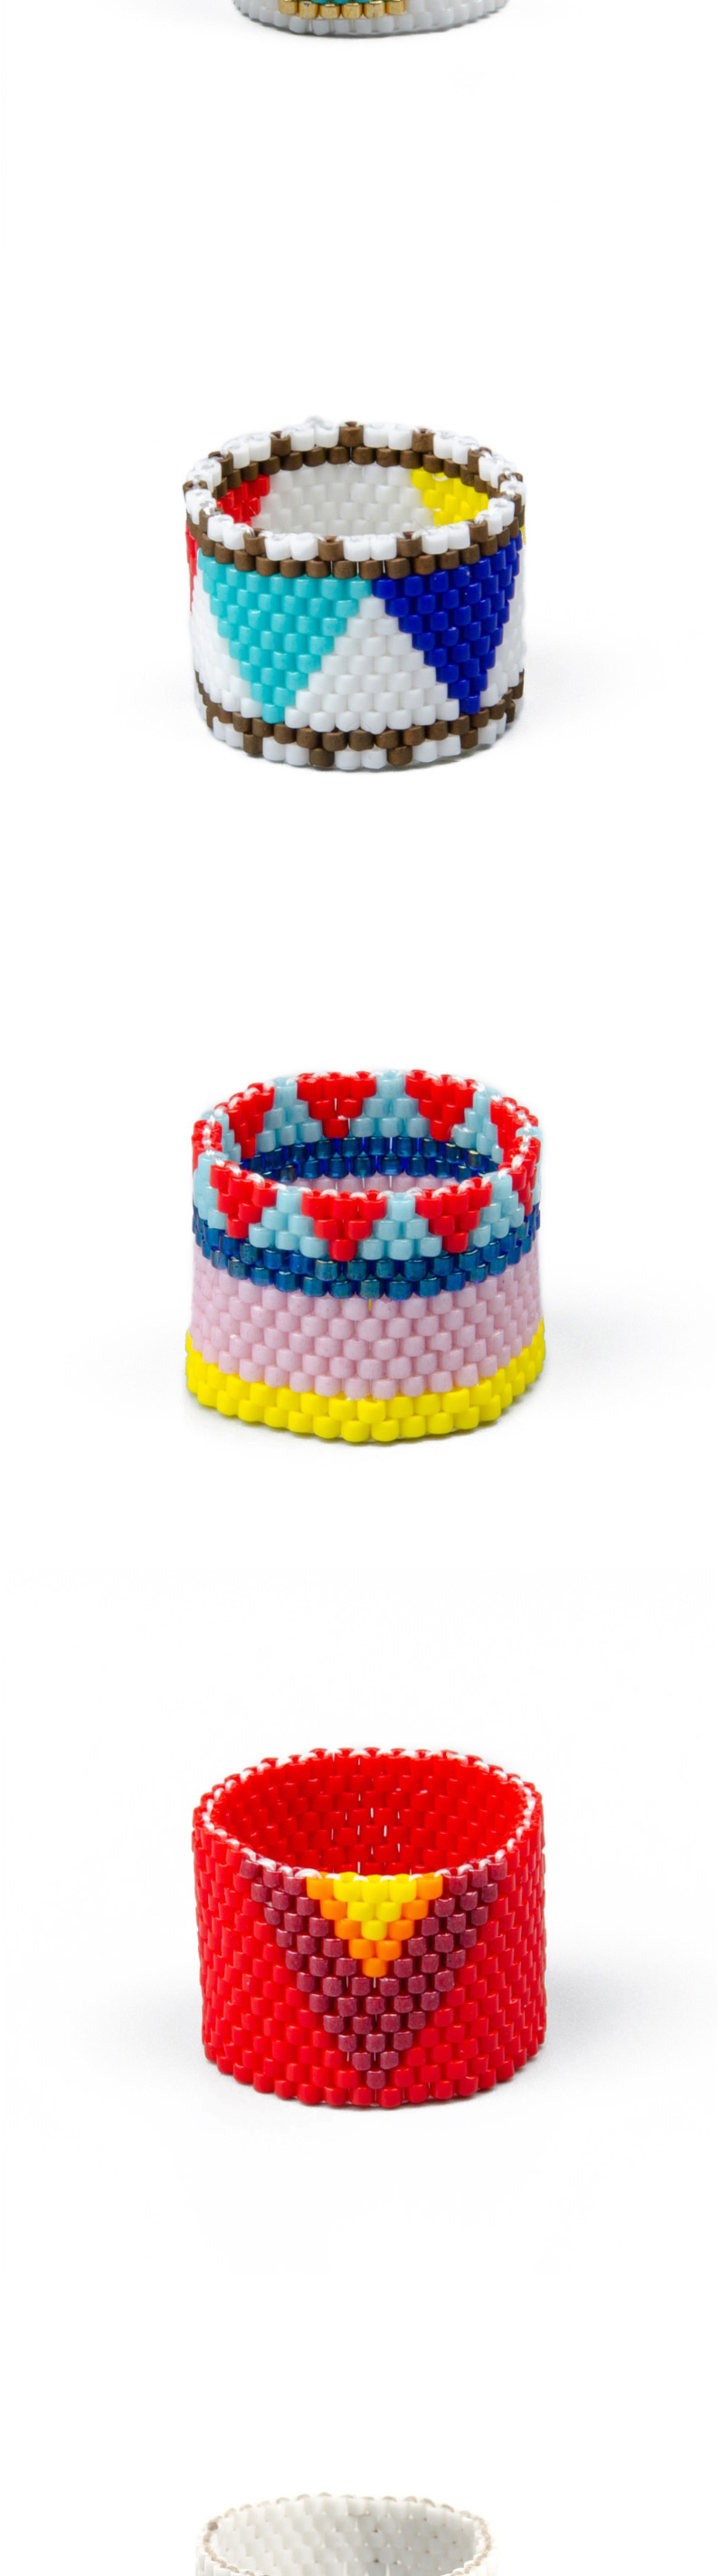 Fashion Blue Rice Beads Woven Flower Ring,Fashion Rings